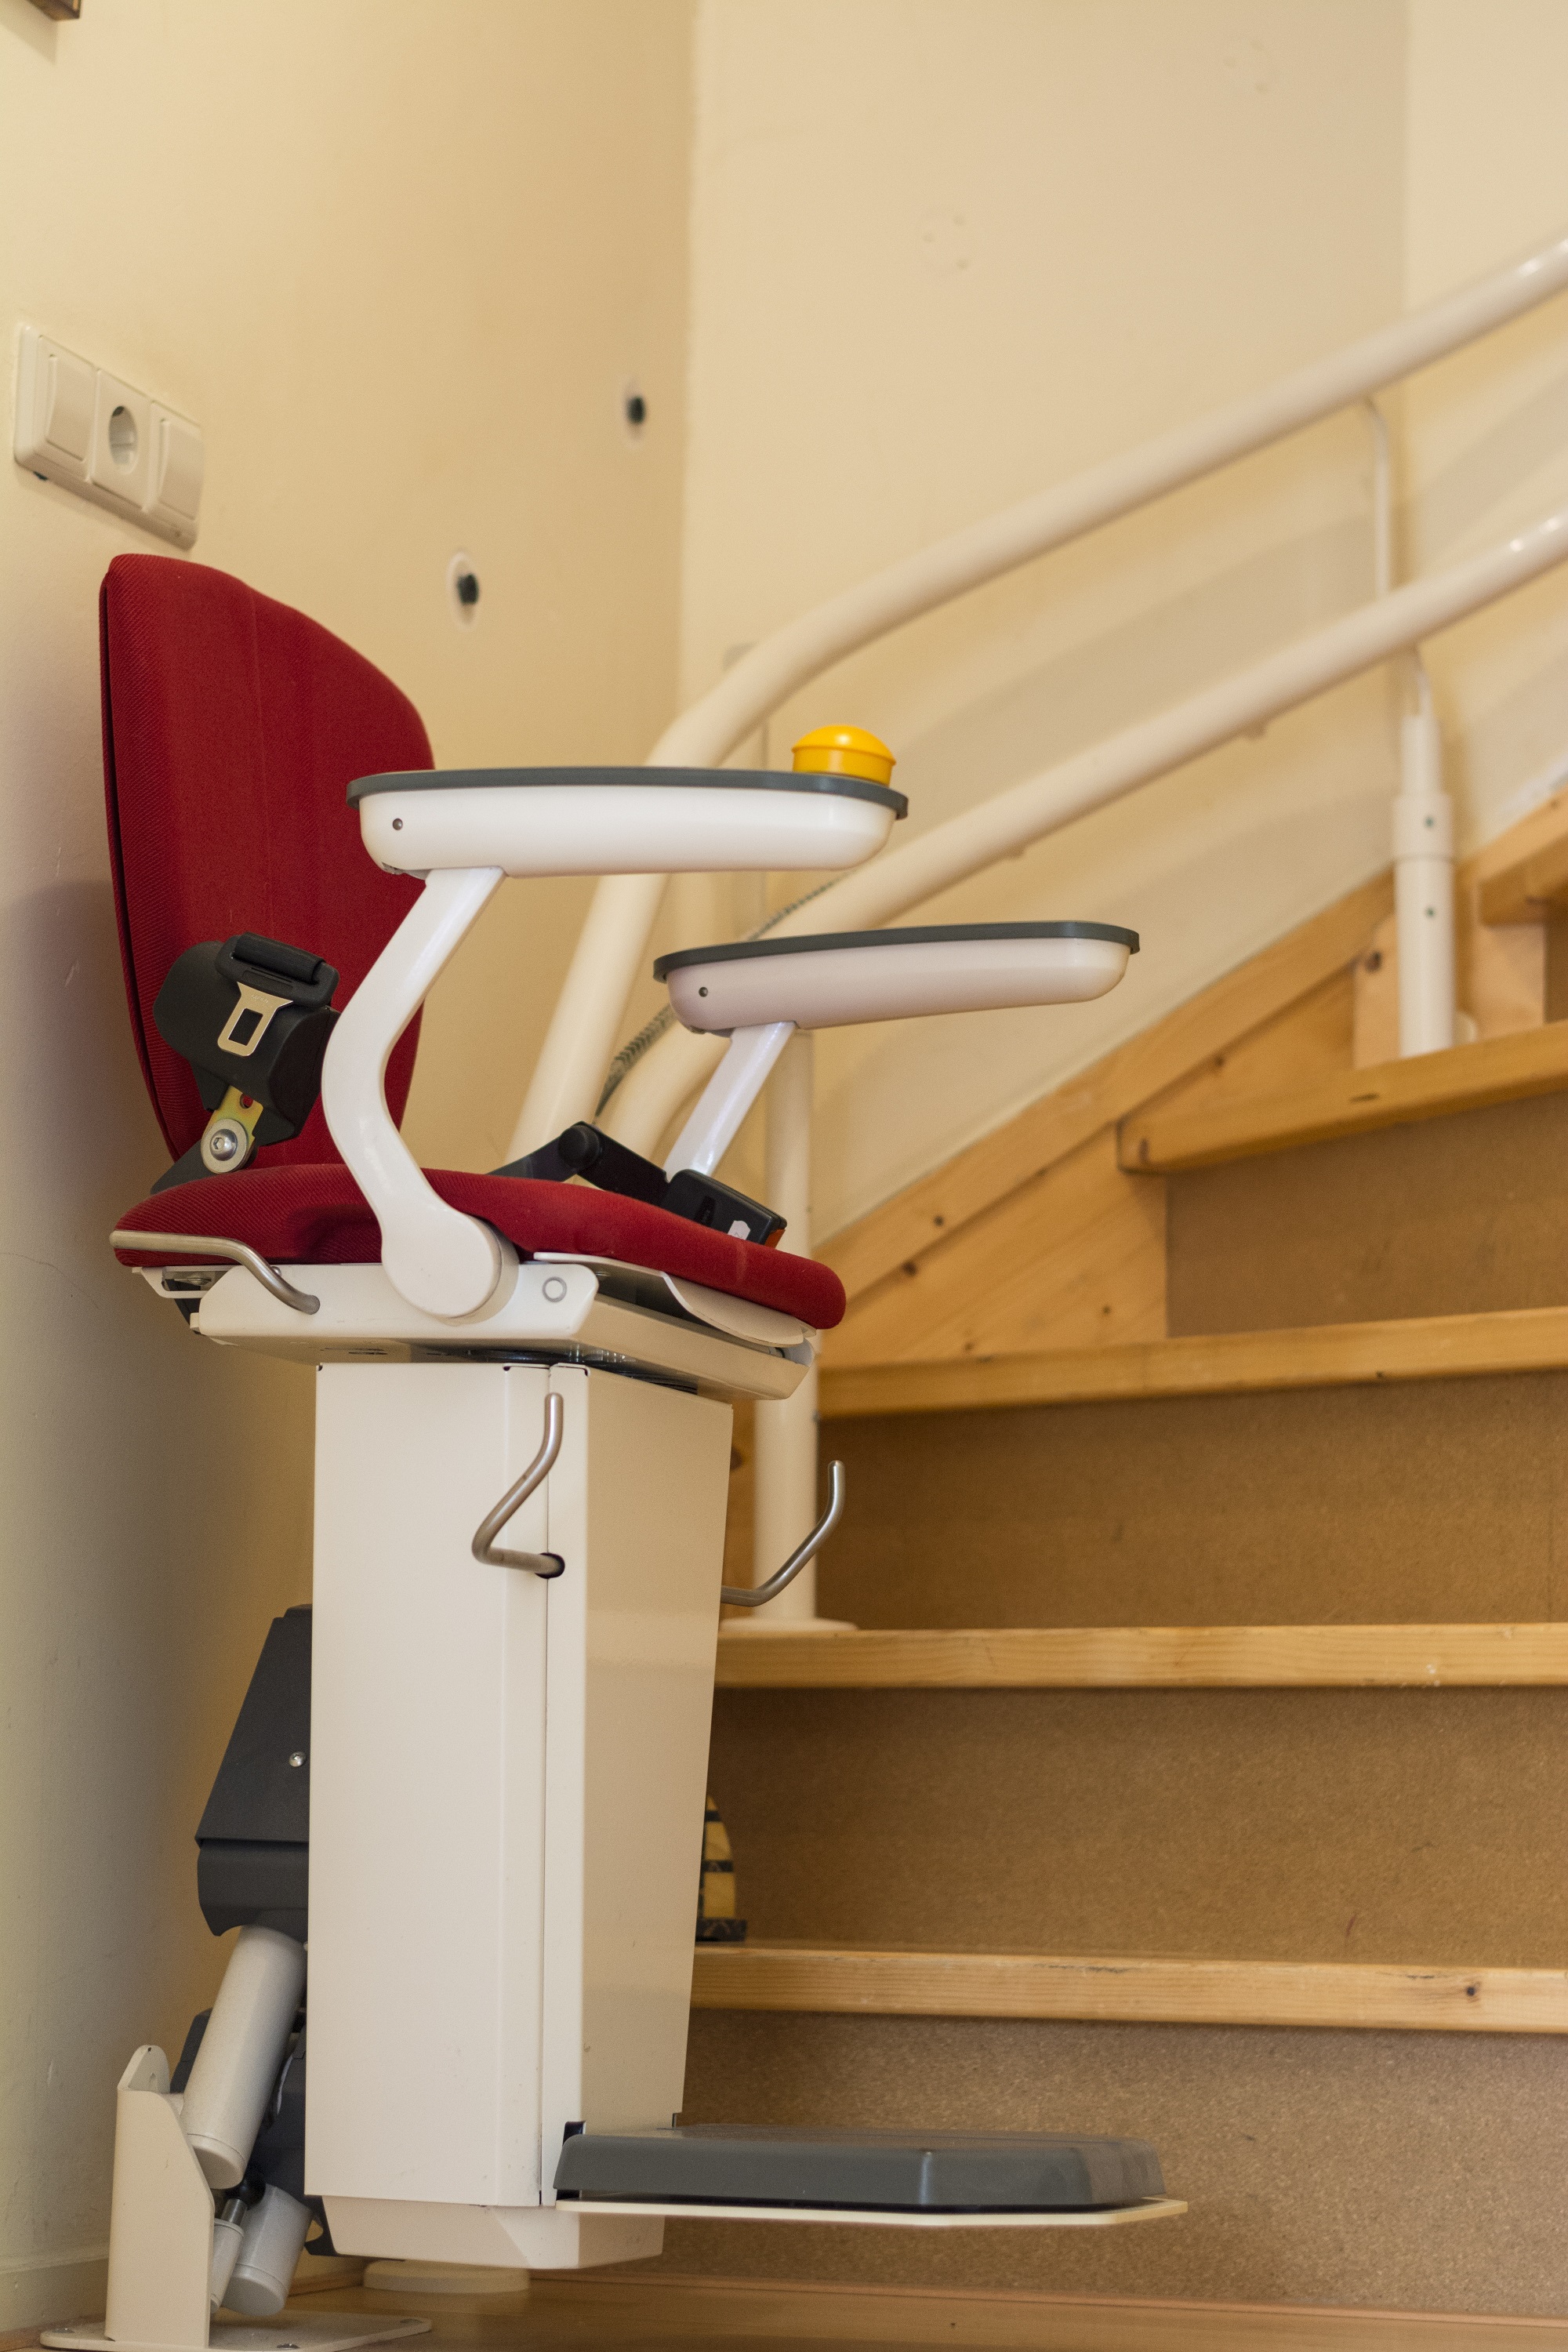 red cushion stair lift at the bottom of stairs